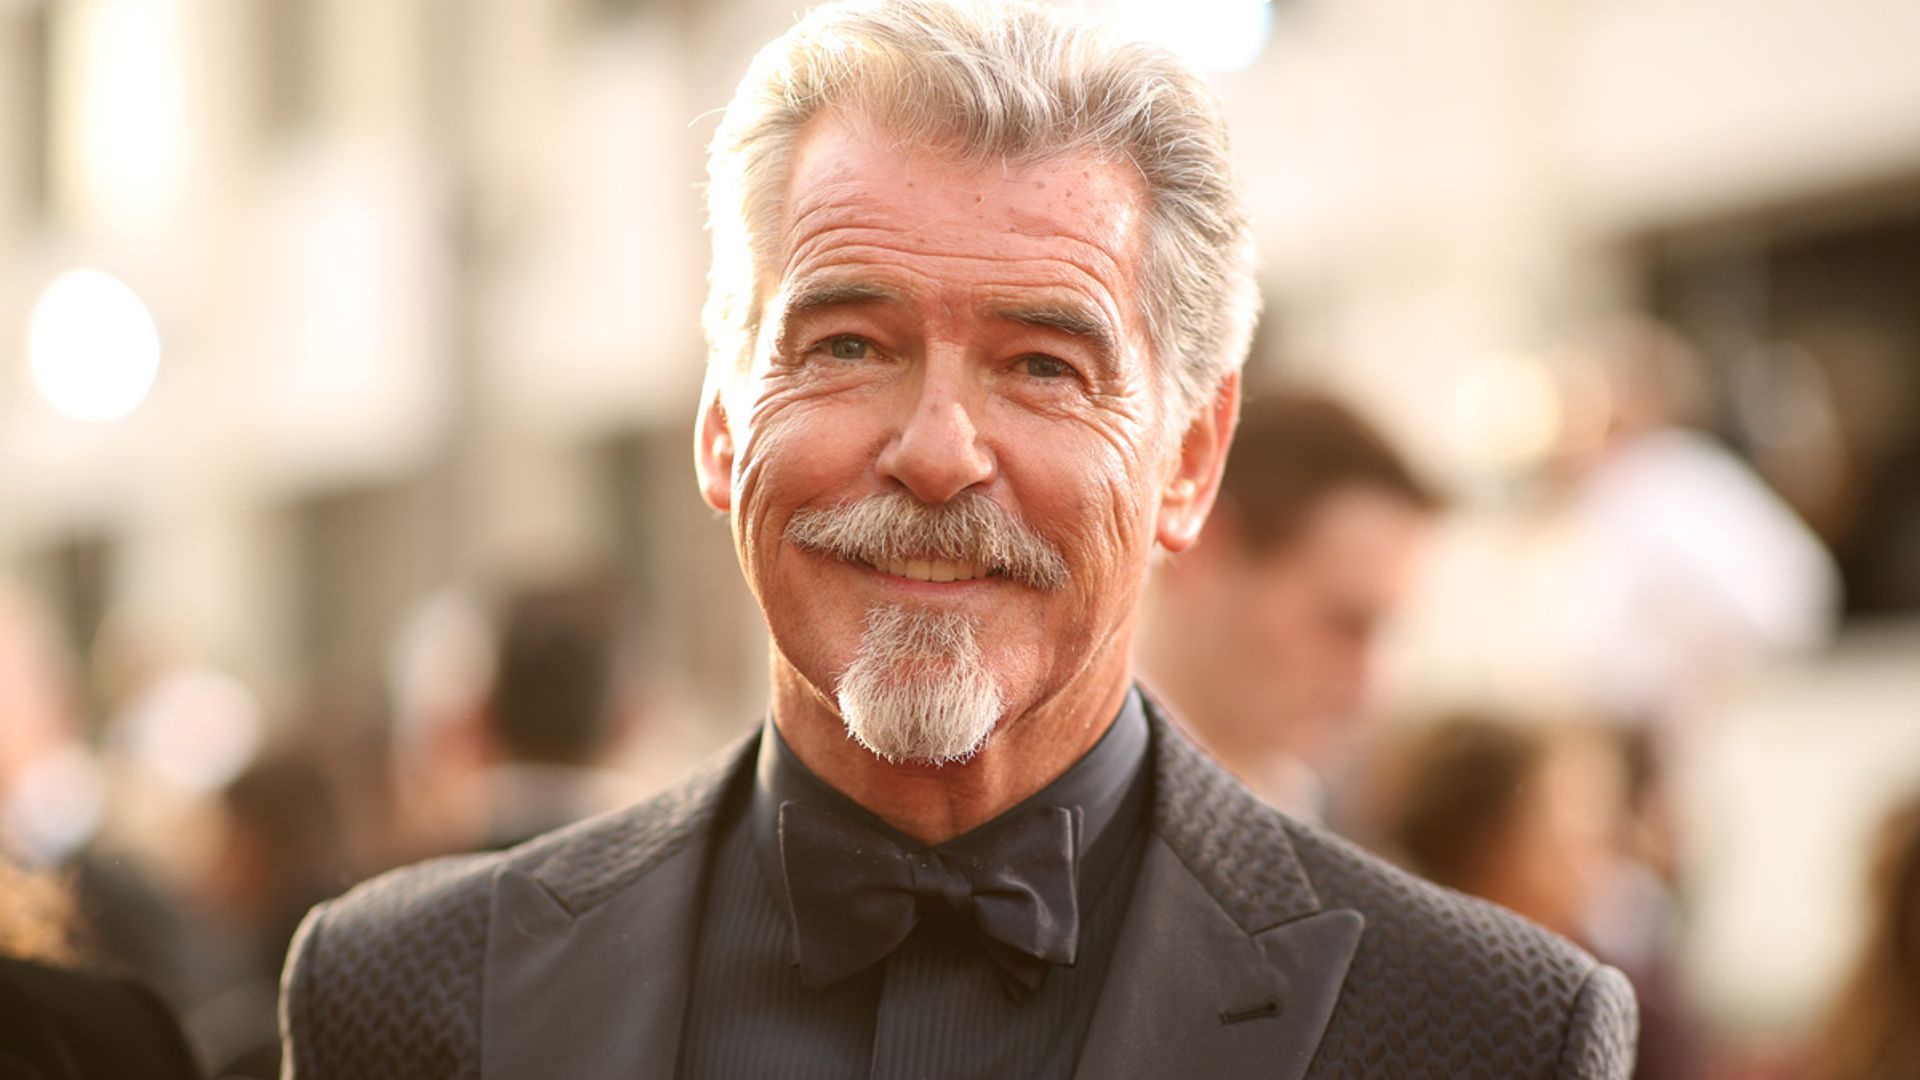 Pierce Brosnan shares incredibly rare family photo in celebration of his son's birthday